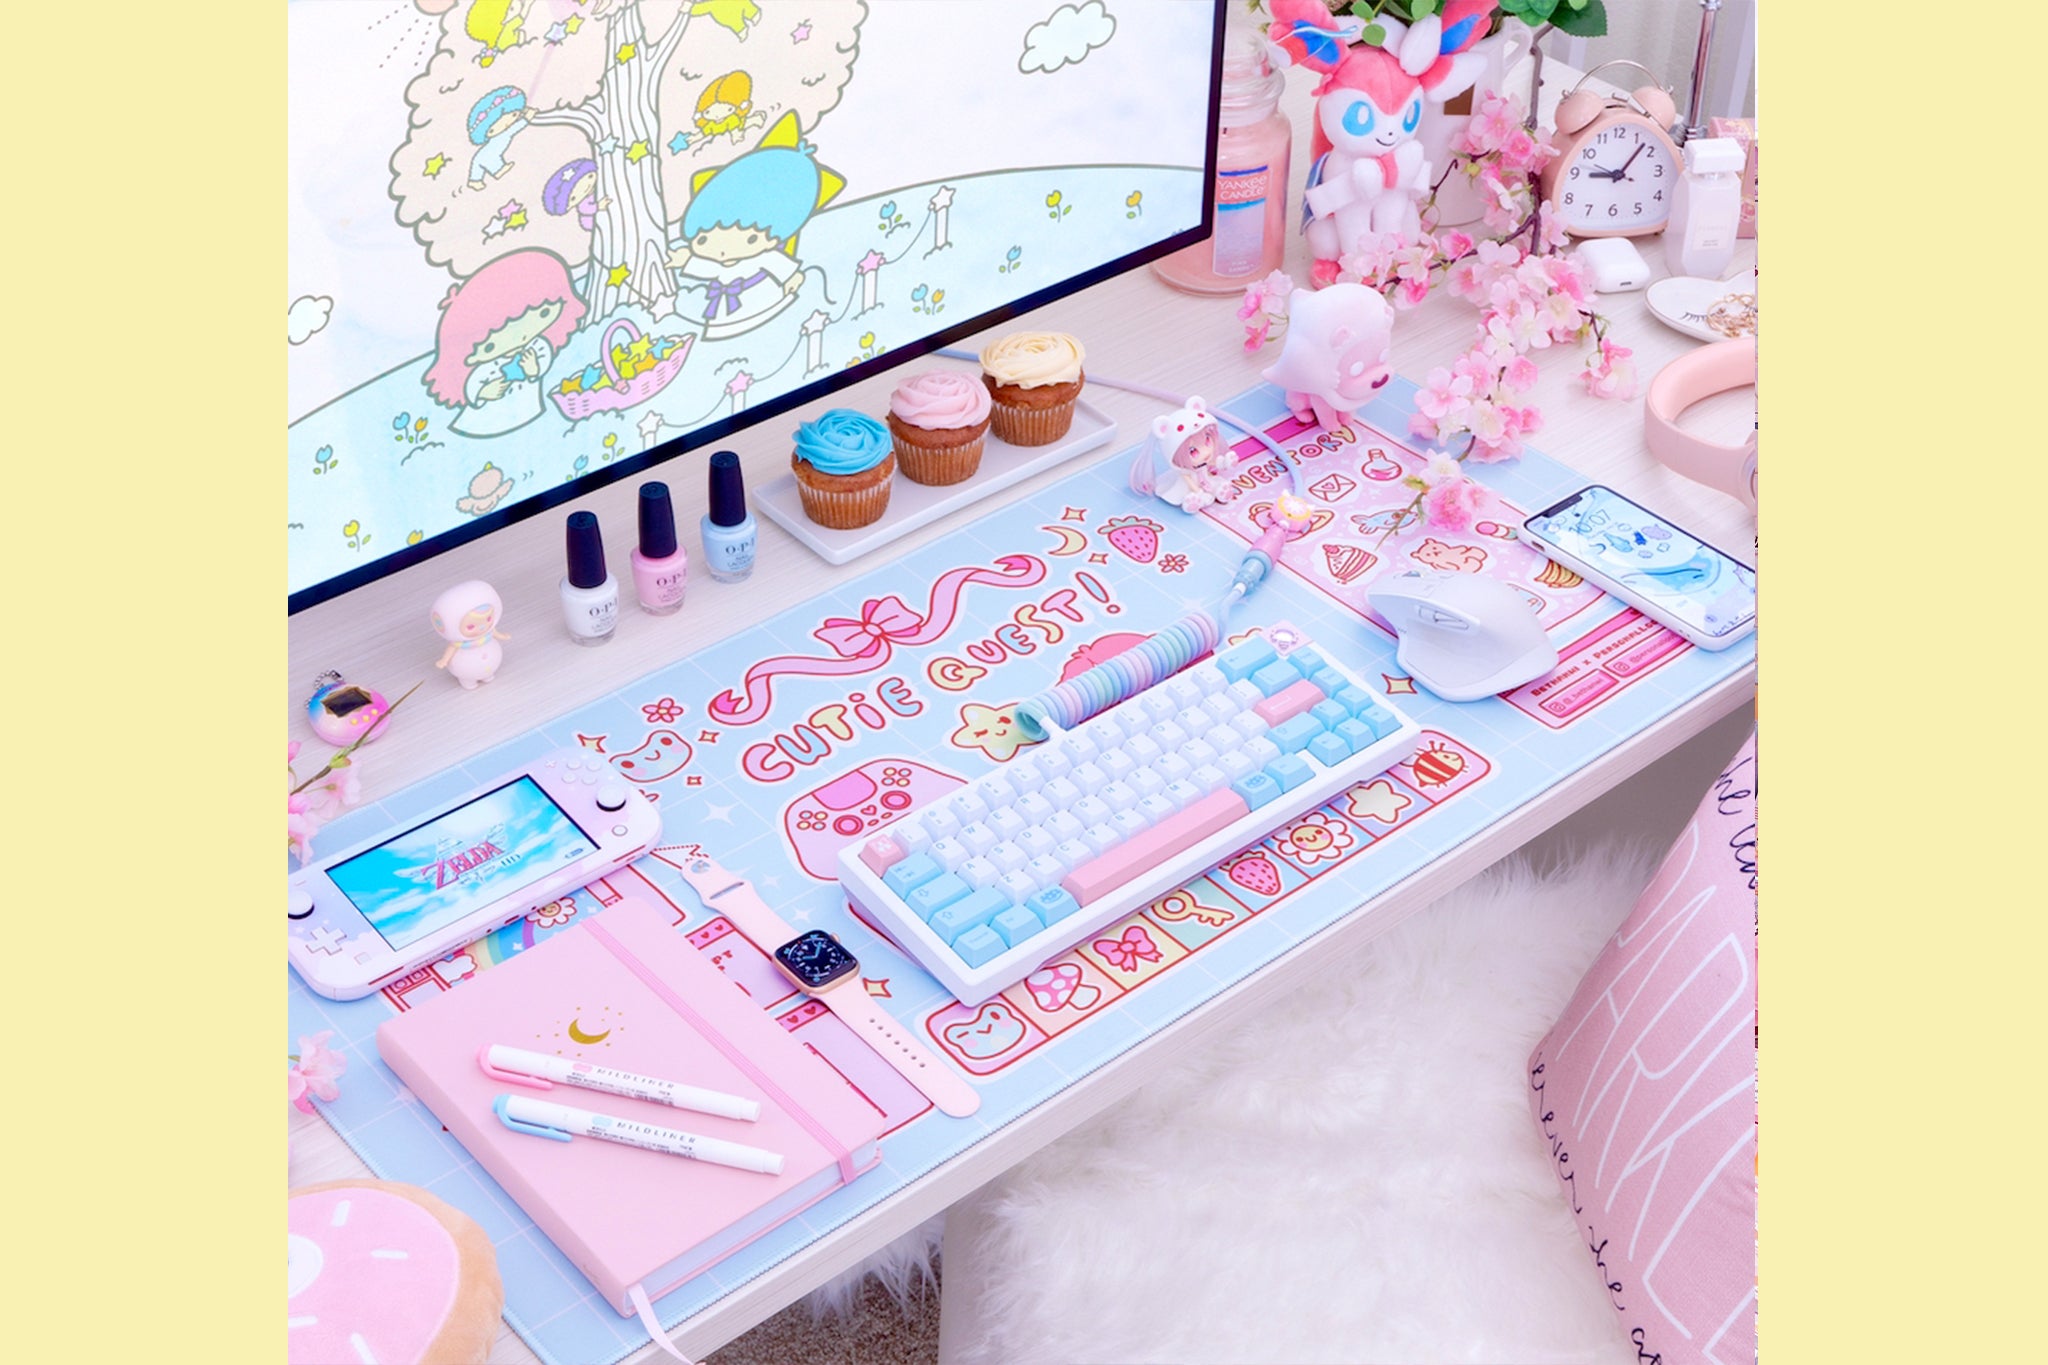 Cutie Quest Deskmat - Bethanwi x Personal Loot - IN STOCK